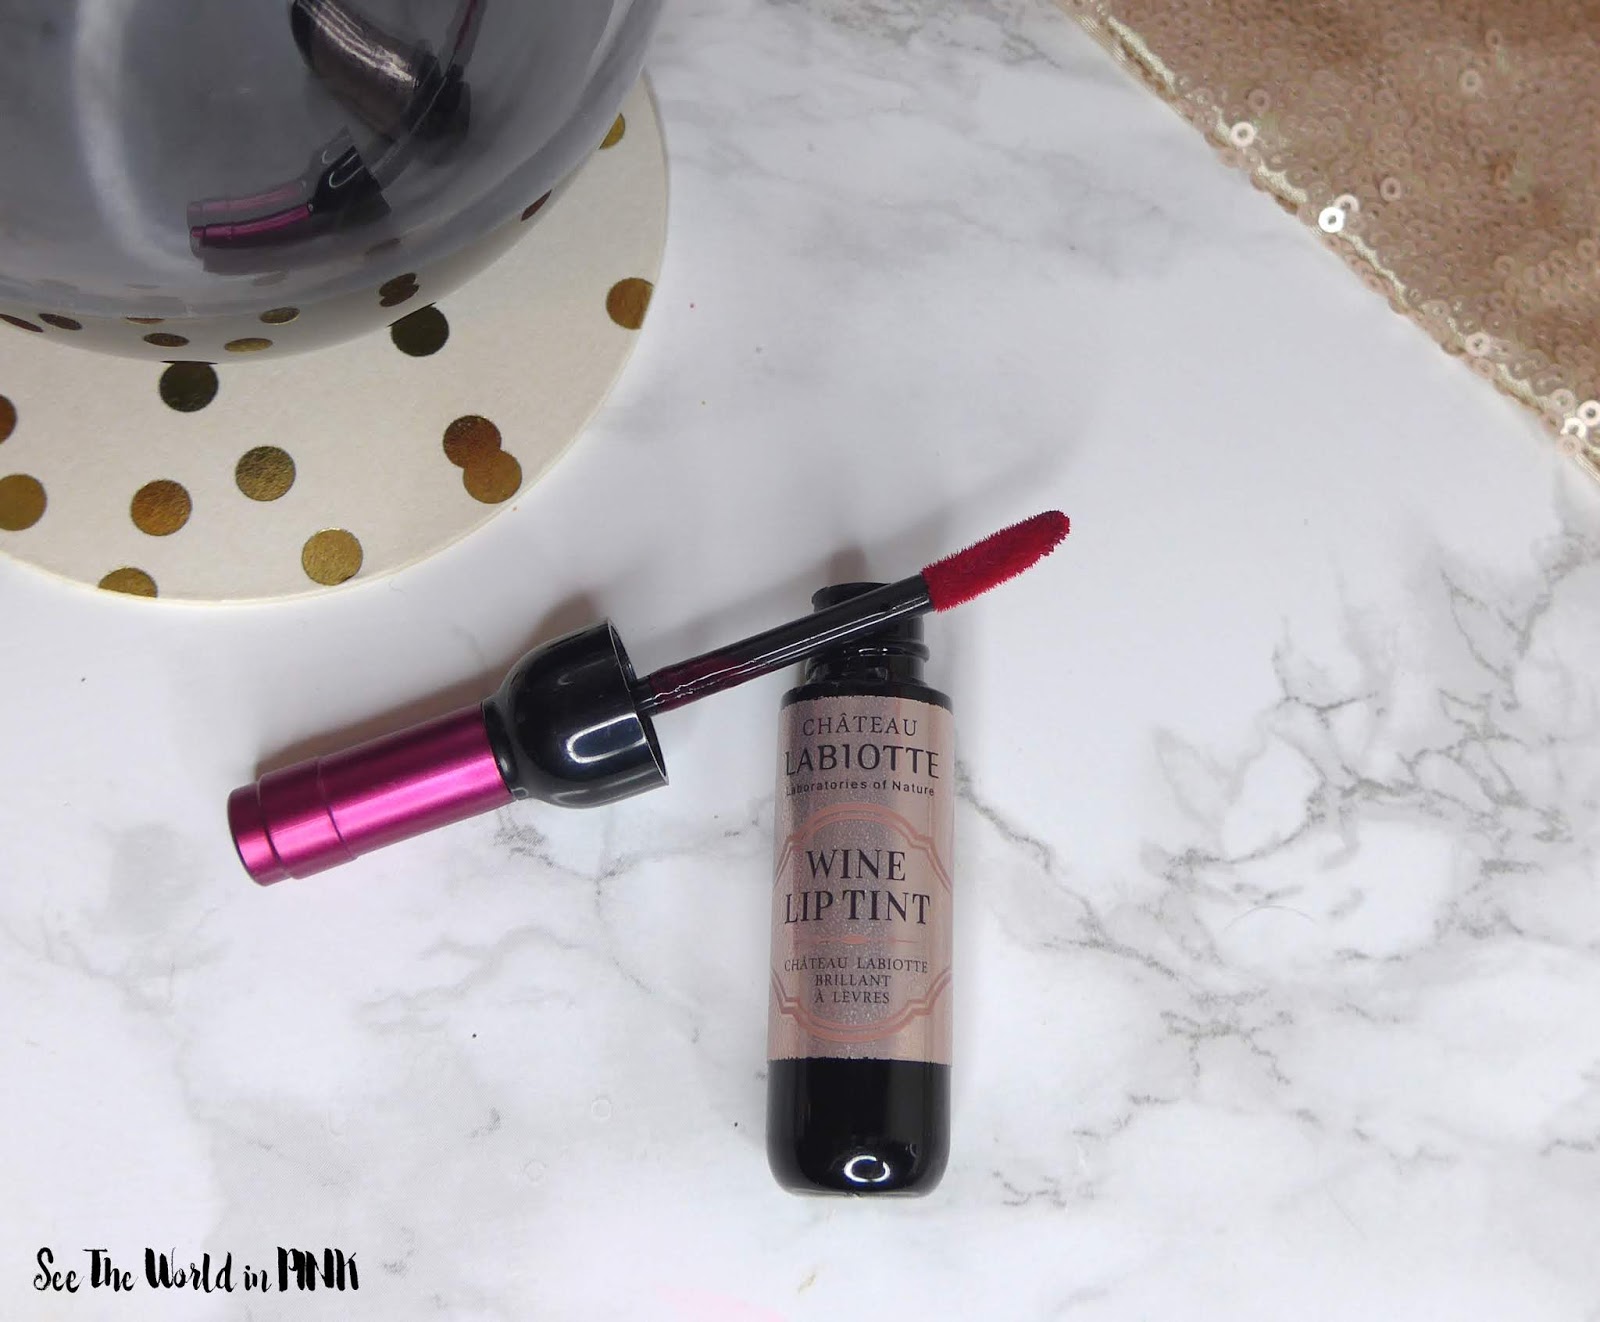 Labiotte Chateau - Wine Lip Tint in "Nebbiolo Red"